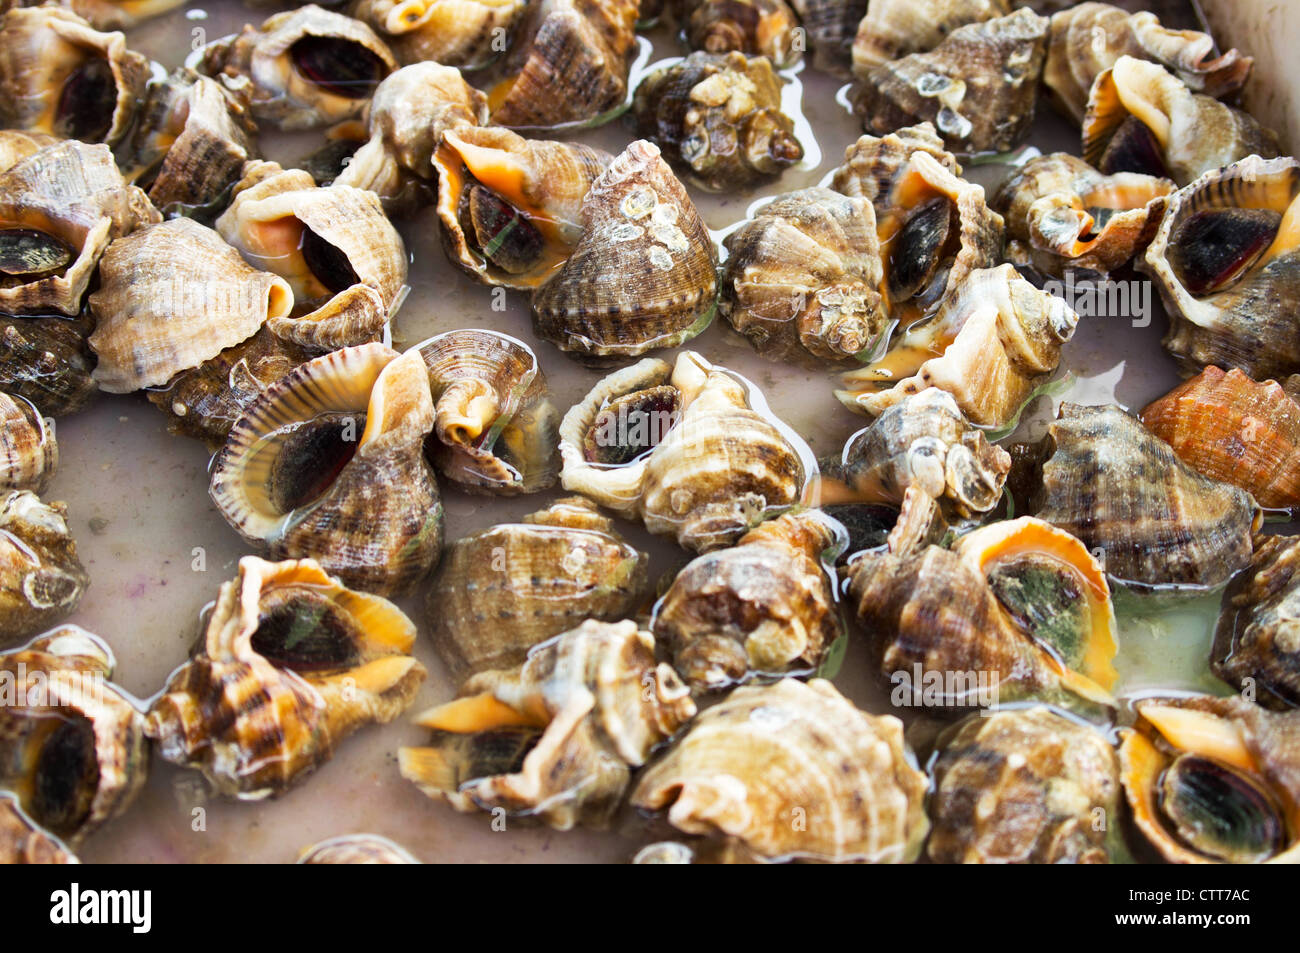 Seafood: Background of live conch Stock Photo